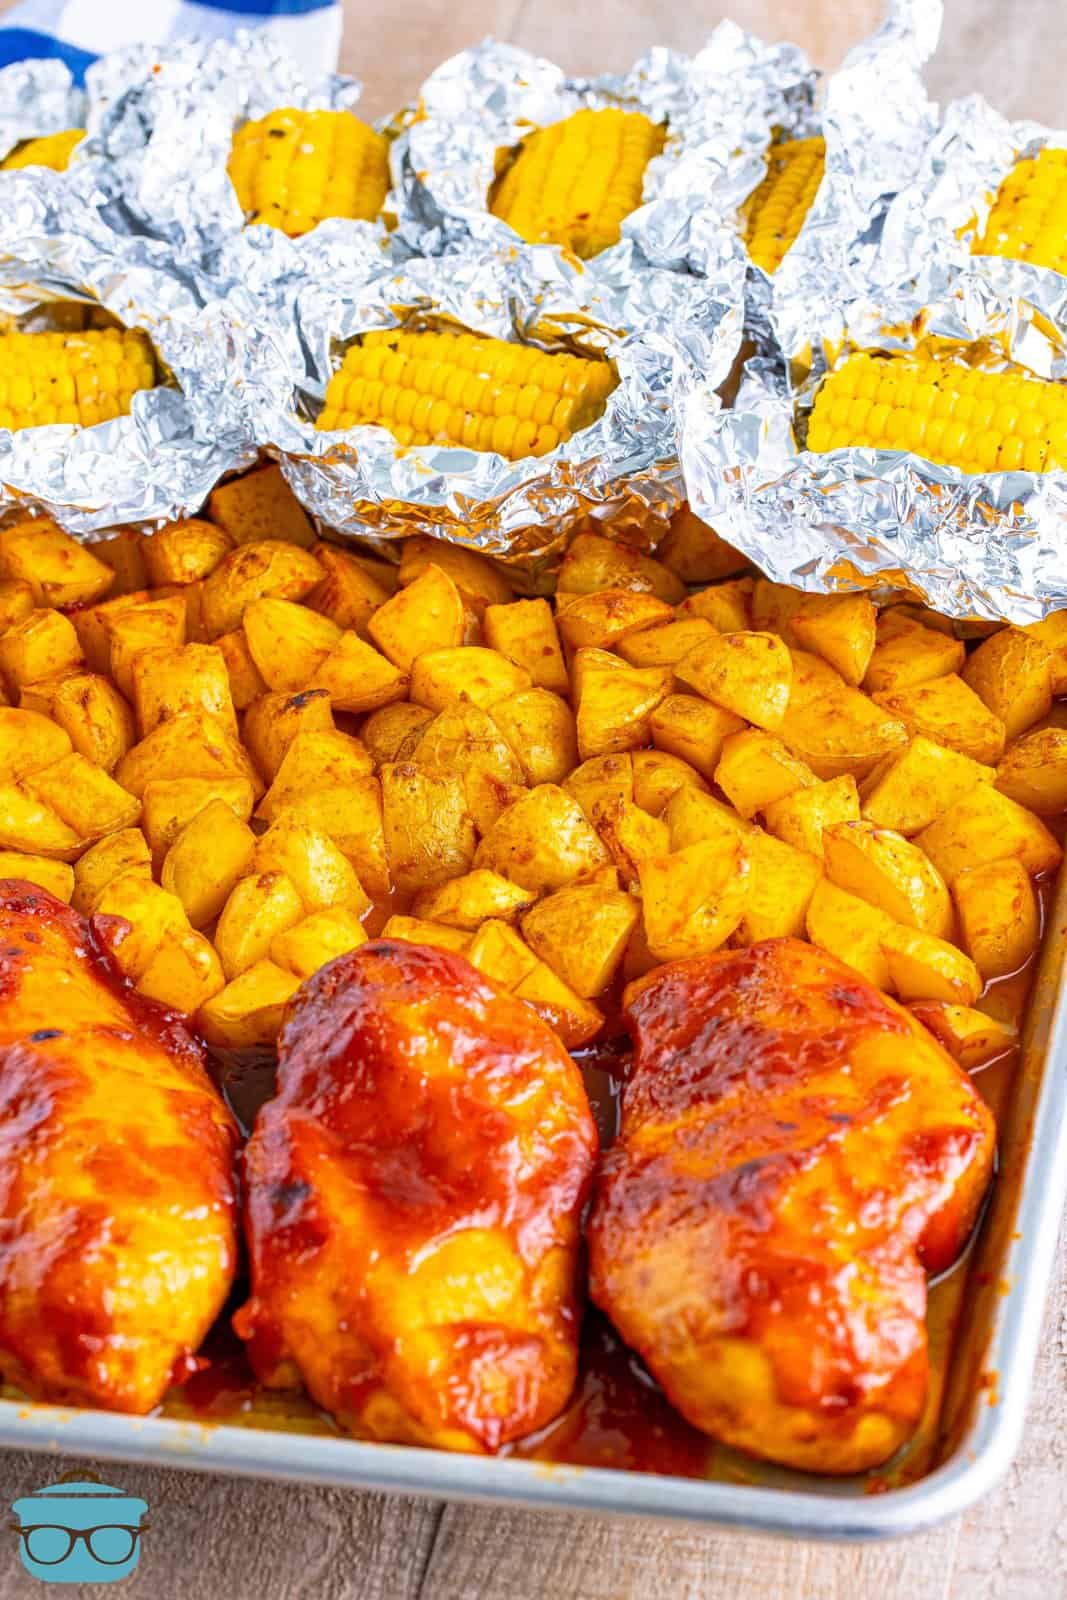 A BBQ Chicken Sheet Pan Mea with chicken, potatoes, and corn on the cob.